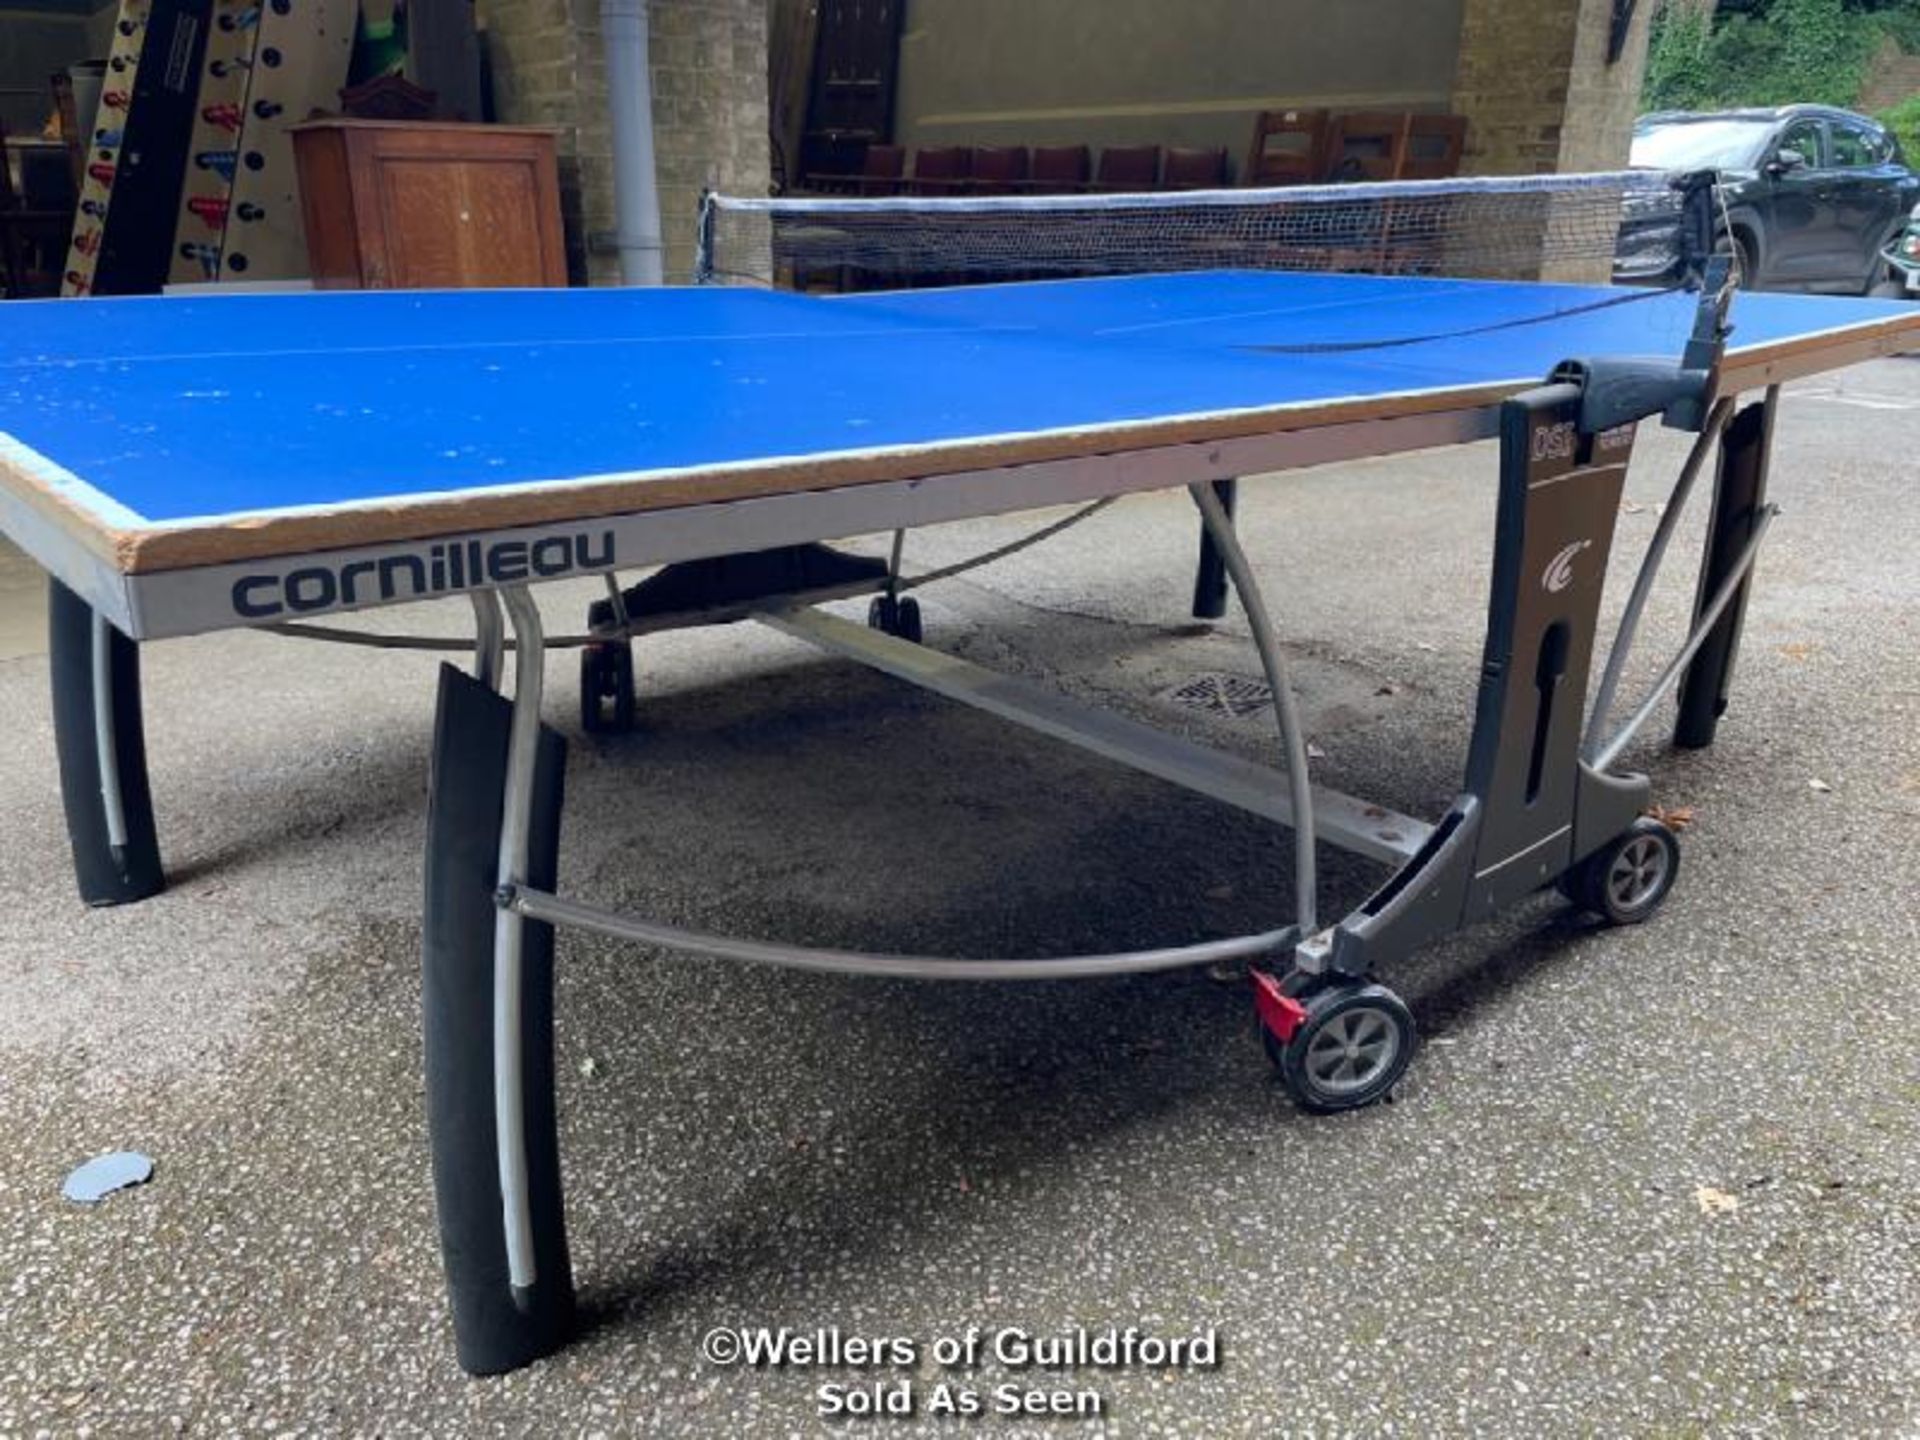 *CORNILLEAU FOLDING TABLE TENNIS TABLE WITH NET, NET NEEDS REPLACING ND NET FIXINGS NEED SORTING - - Image 2 of 6